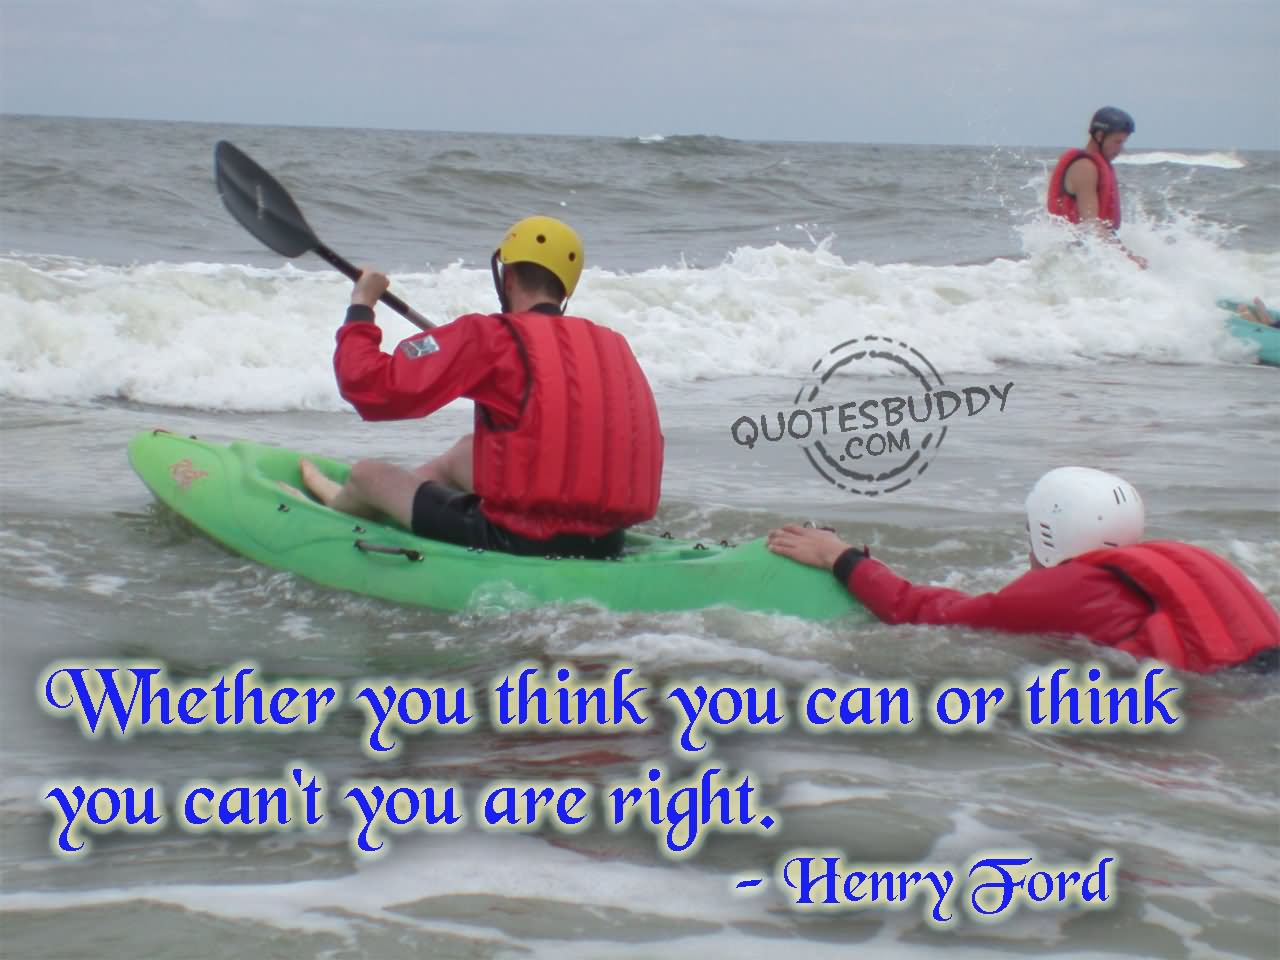 Whether you think you can or think you can't you are right.  -  Henry Ford.